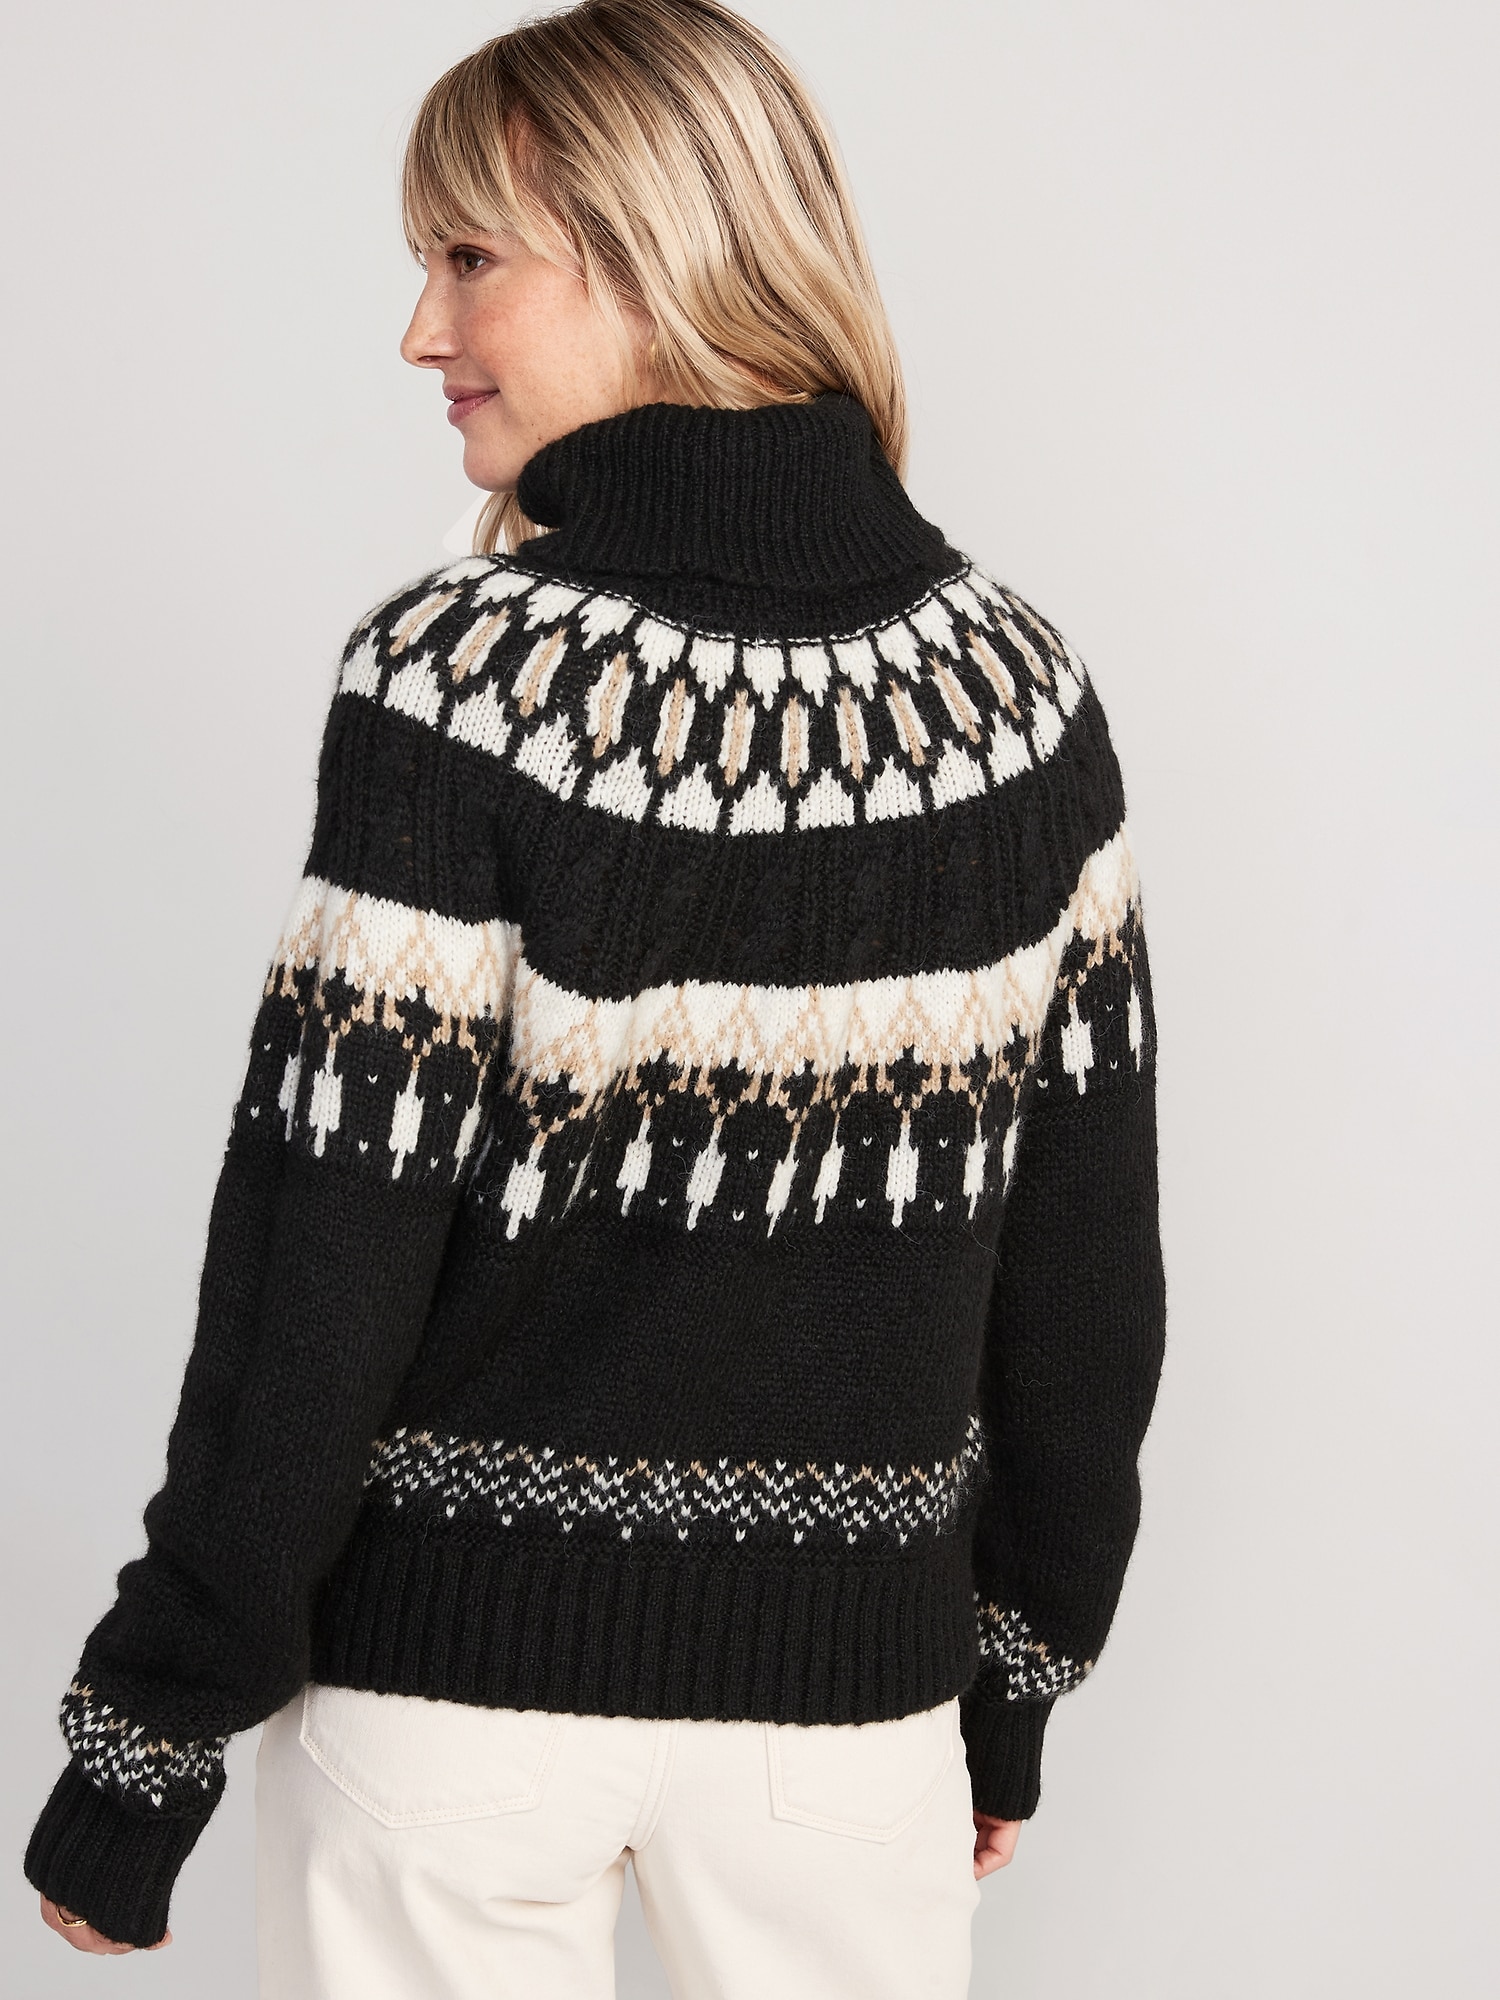 Cozy Fair Isle Cable-Knit Turtleneck Sweater for Women | Old Navy